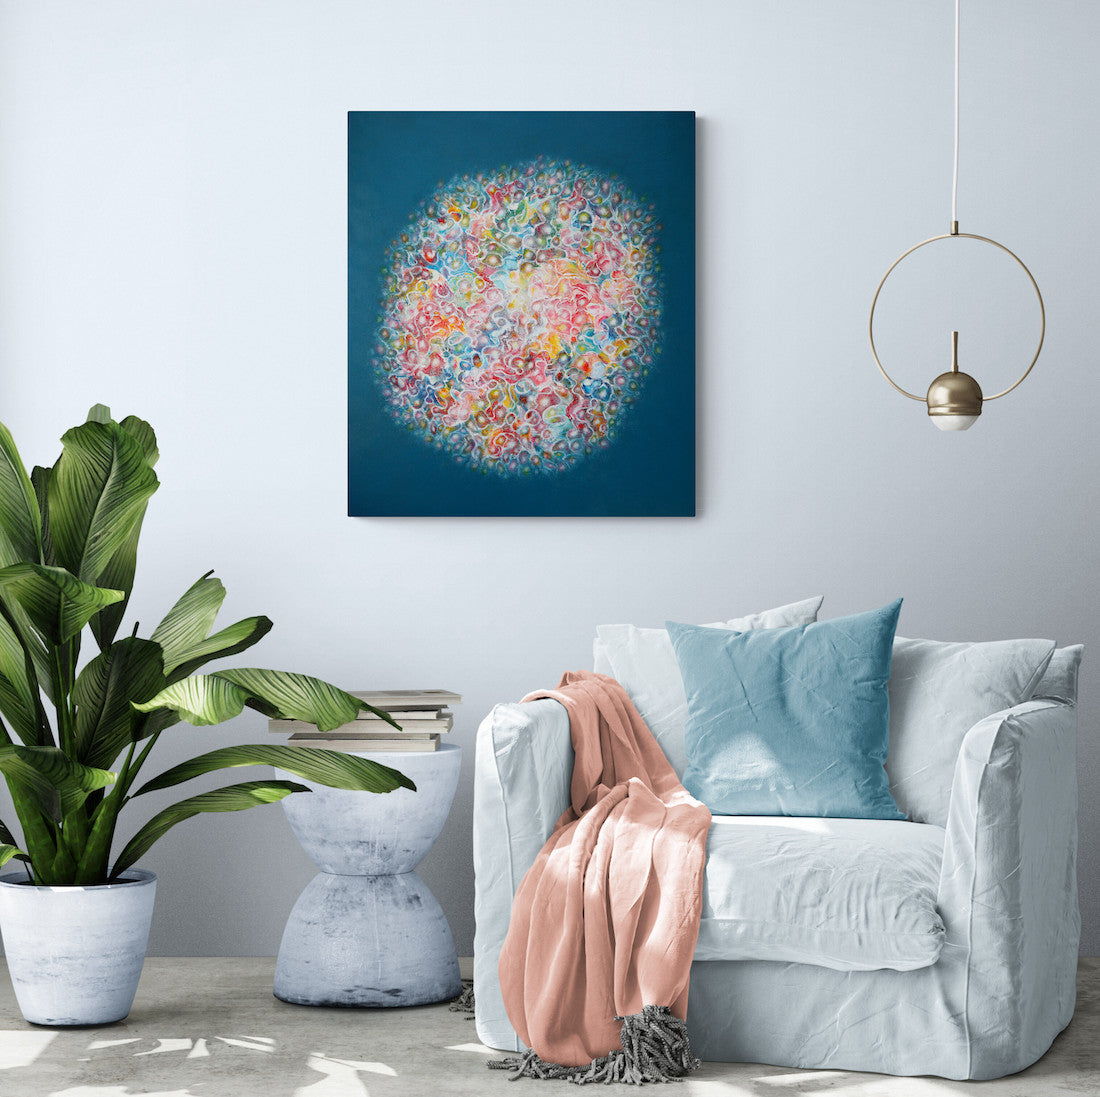 Colourful abstract art in a living room